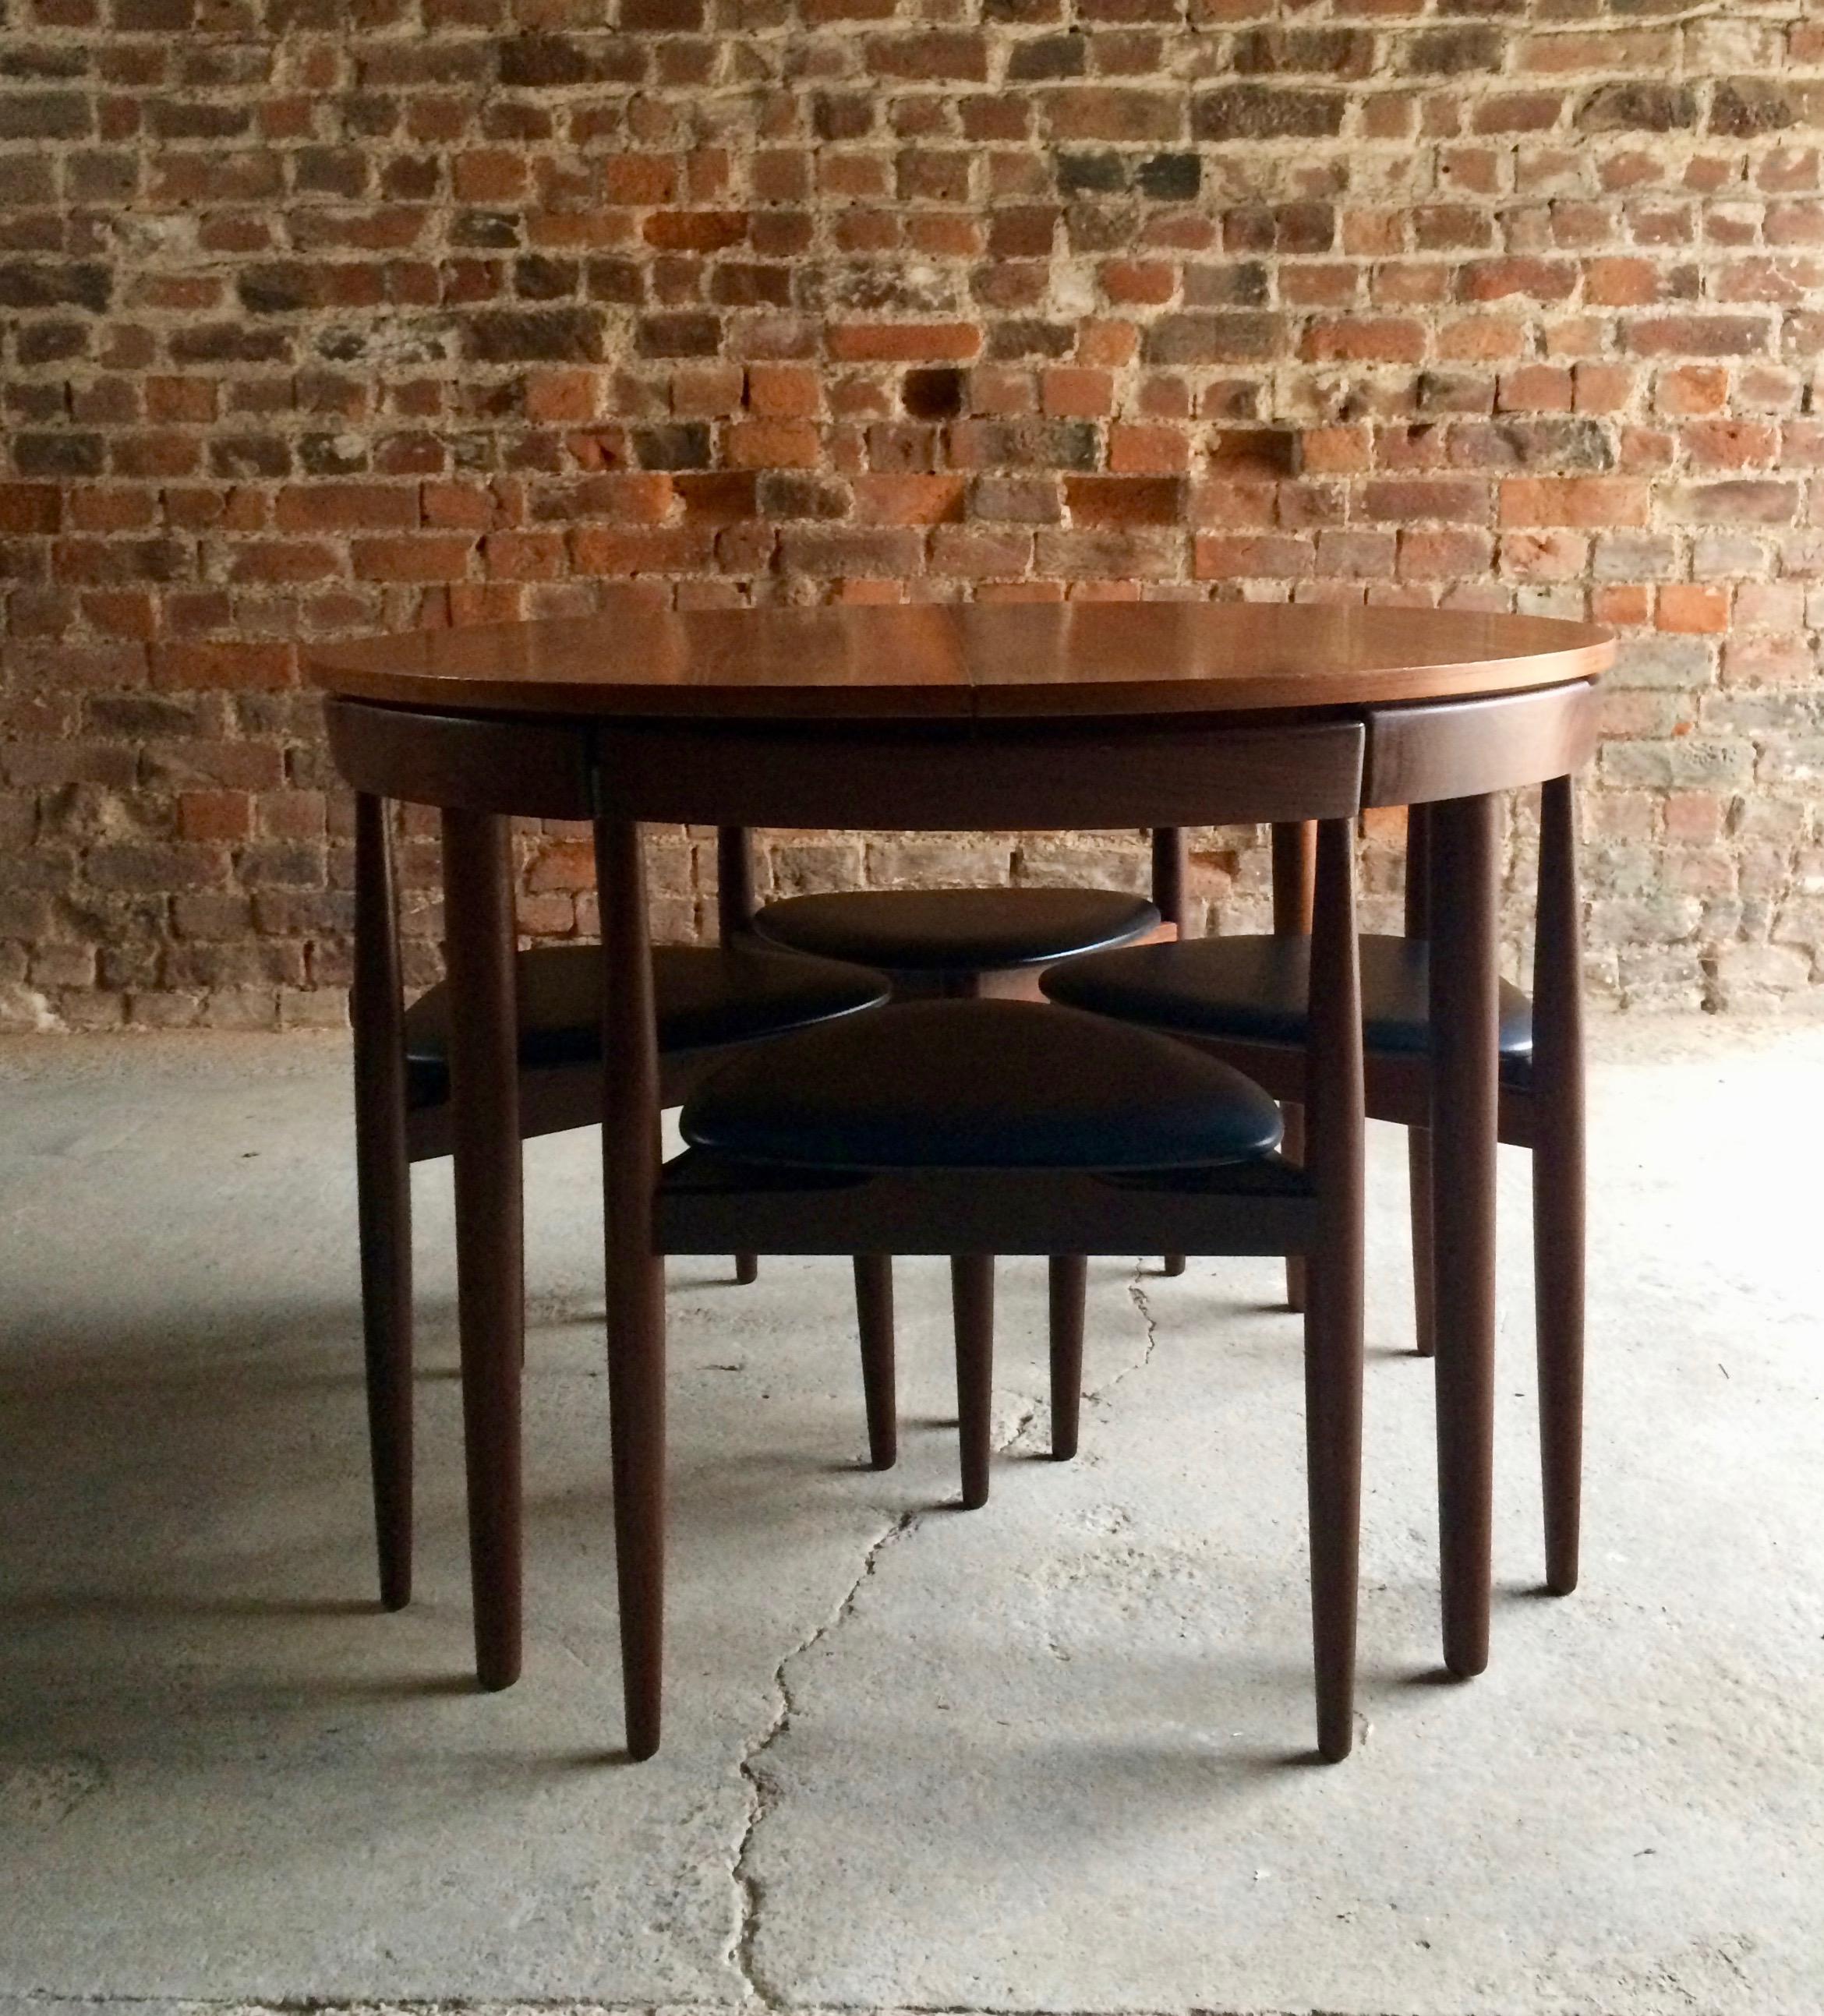 Magnificent midcentury 'Dinette' dining table designed by Hans Olsen and manufactured by Frem Rojle in Denmark during the 1950s. The table is made from teak and features an extending mechanism complete with six chairs circa 1960, makers stamp